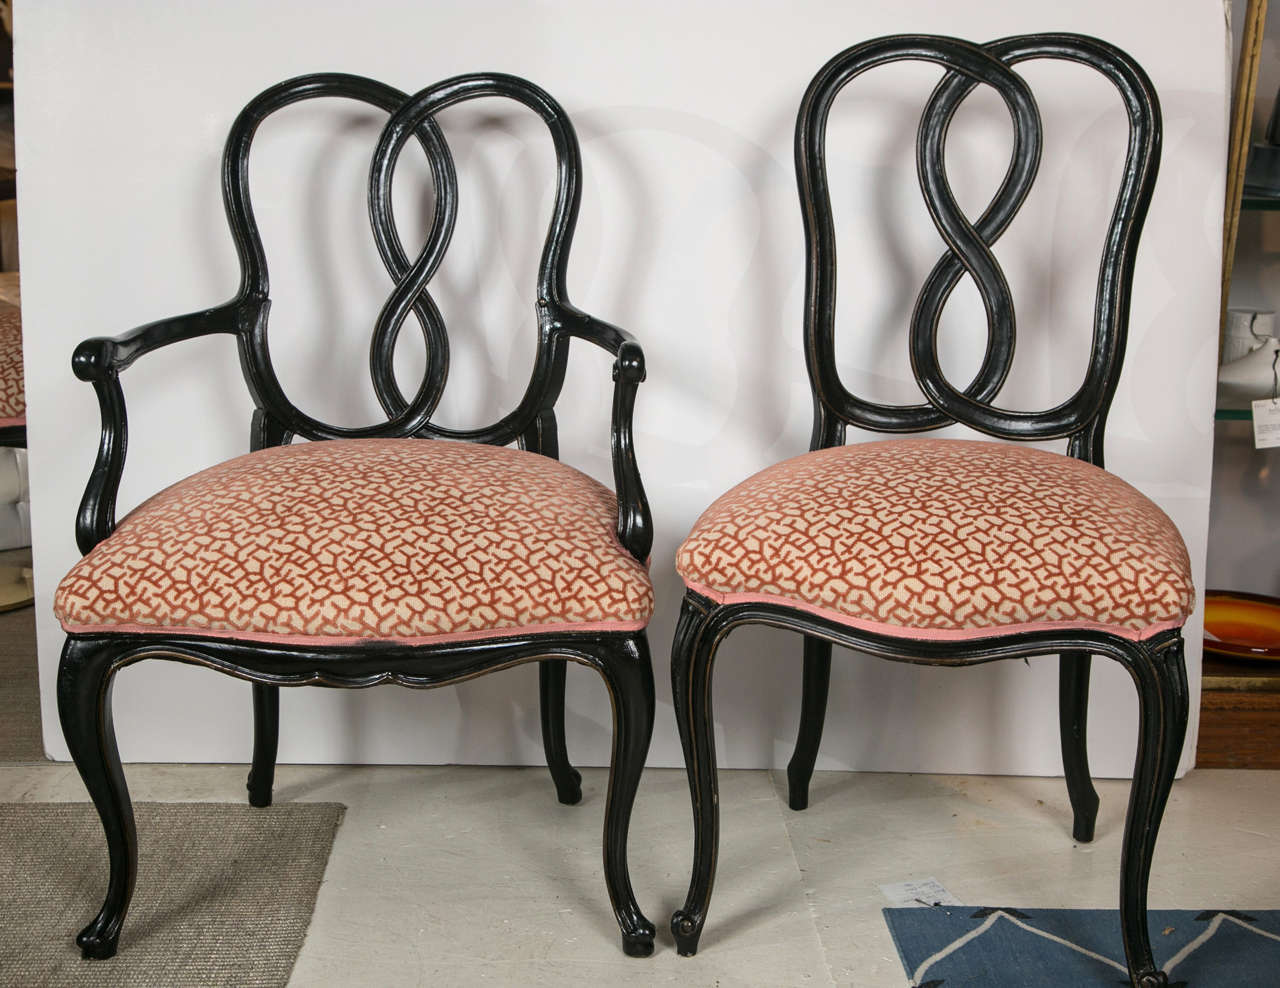 1940s Dining Chairs upholstered in Coral velvet fabric.  Set of 8, 2 arm and 6 side chairs.